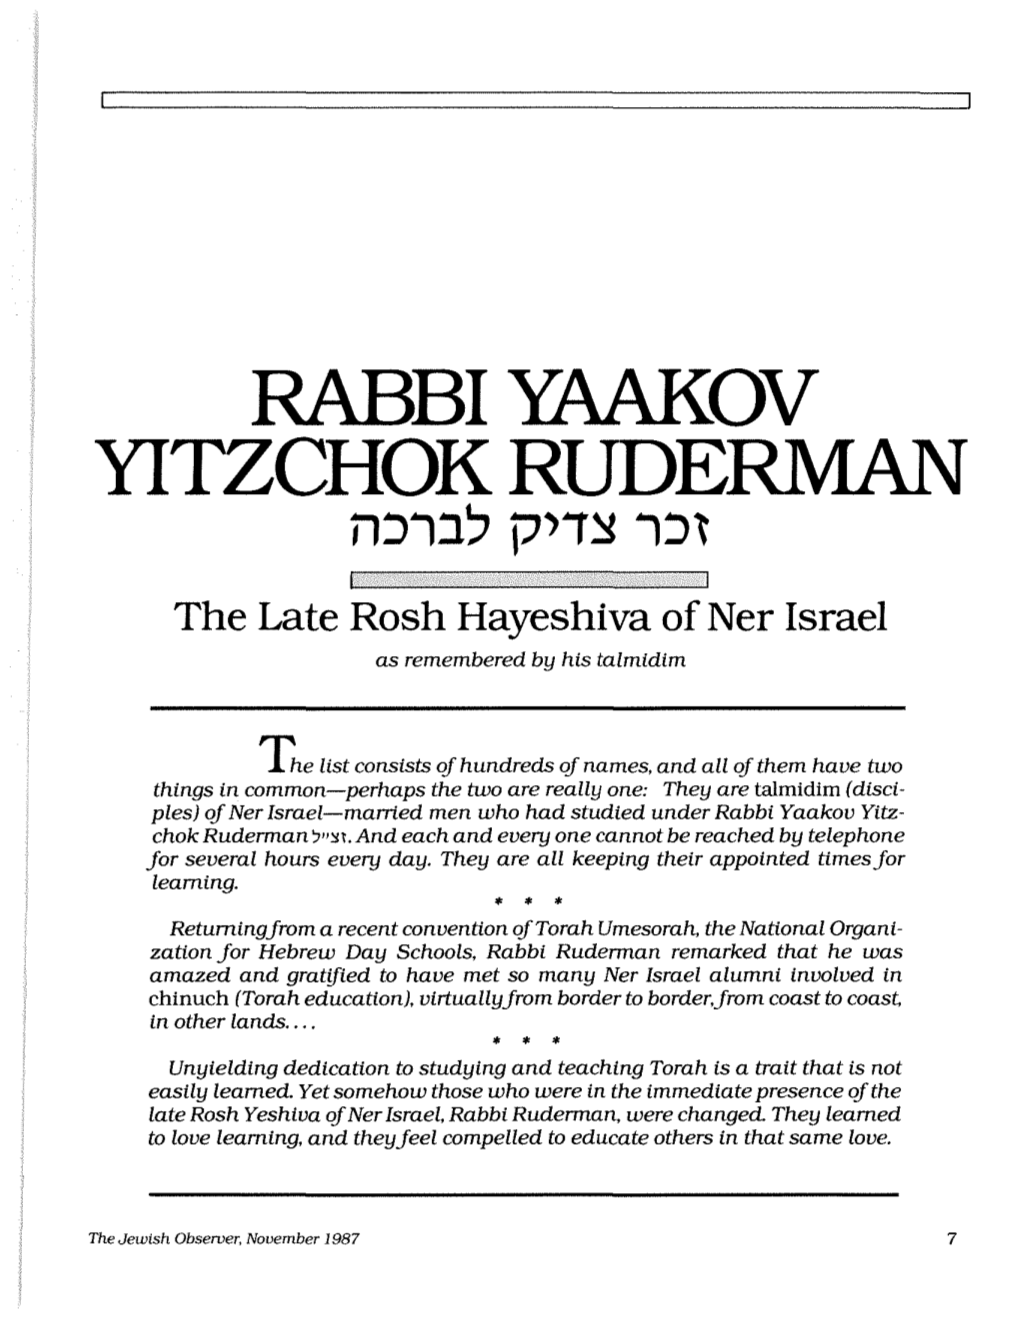 The Late Rosh Hayeshiva of Ner Israel As Remembered by His Talmidim